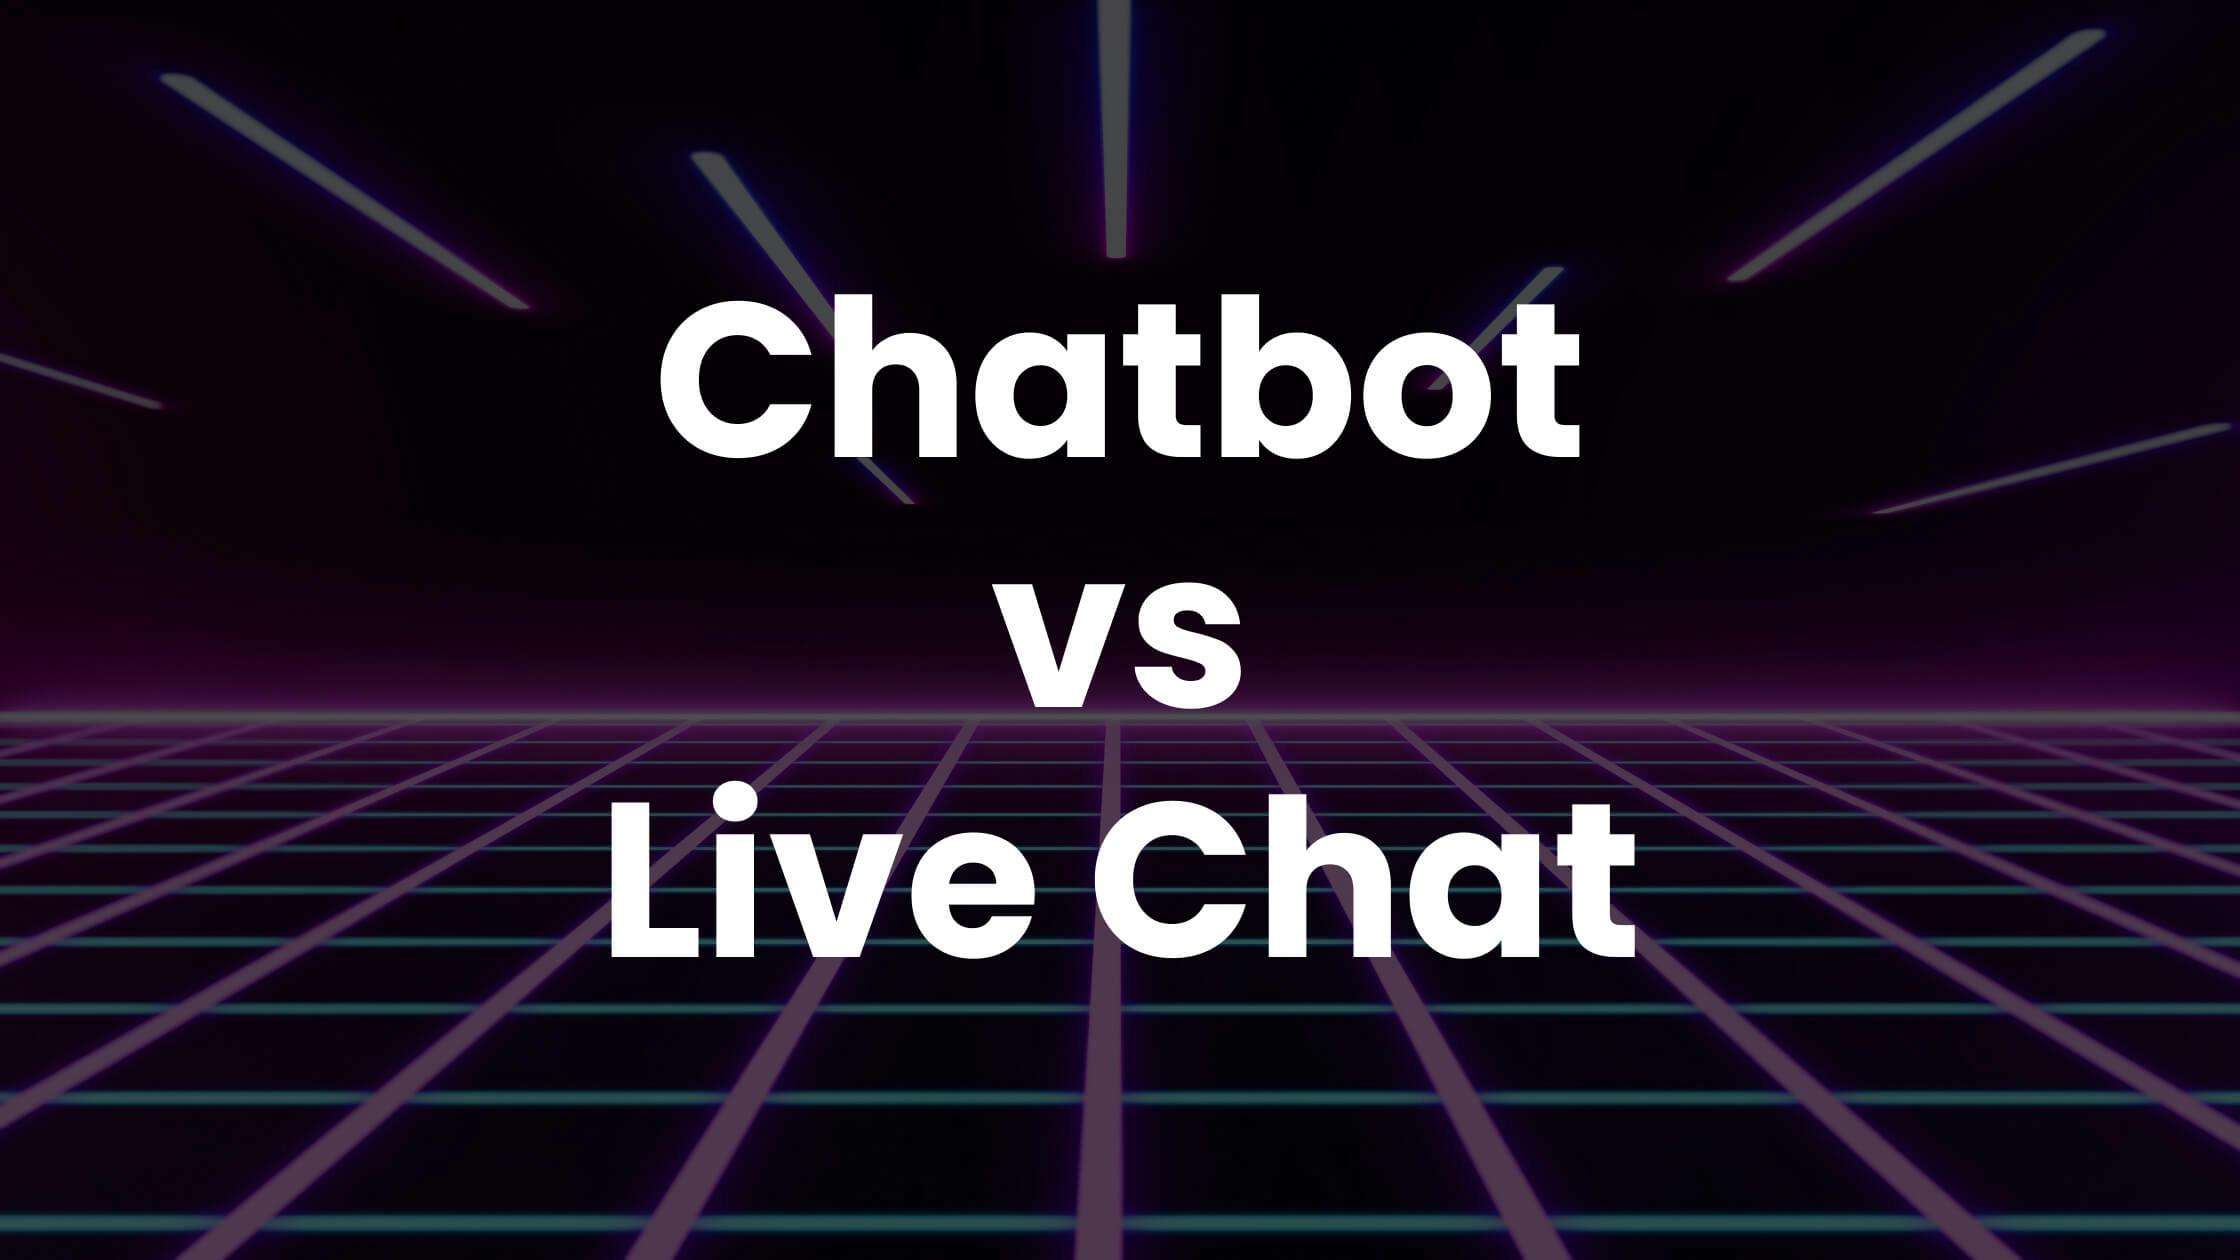 Chatbot vs Live Chat: Which Should You Use for Customer Support?